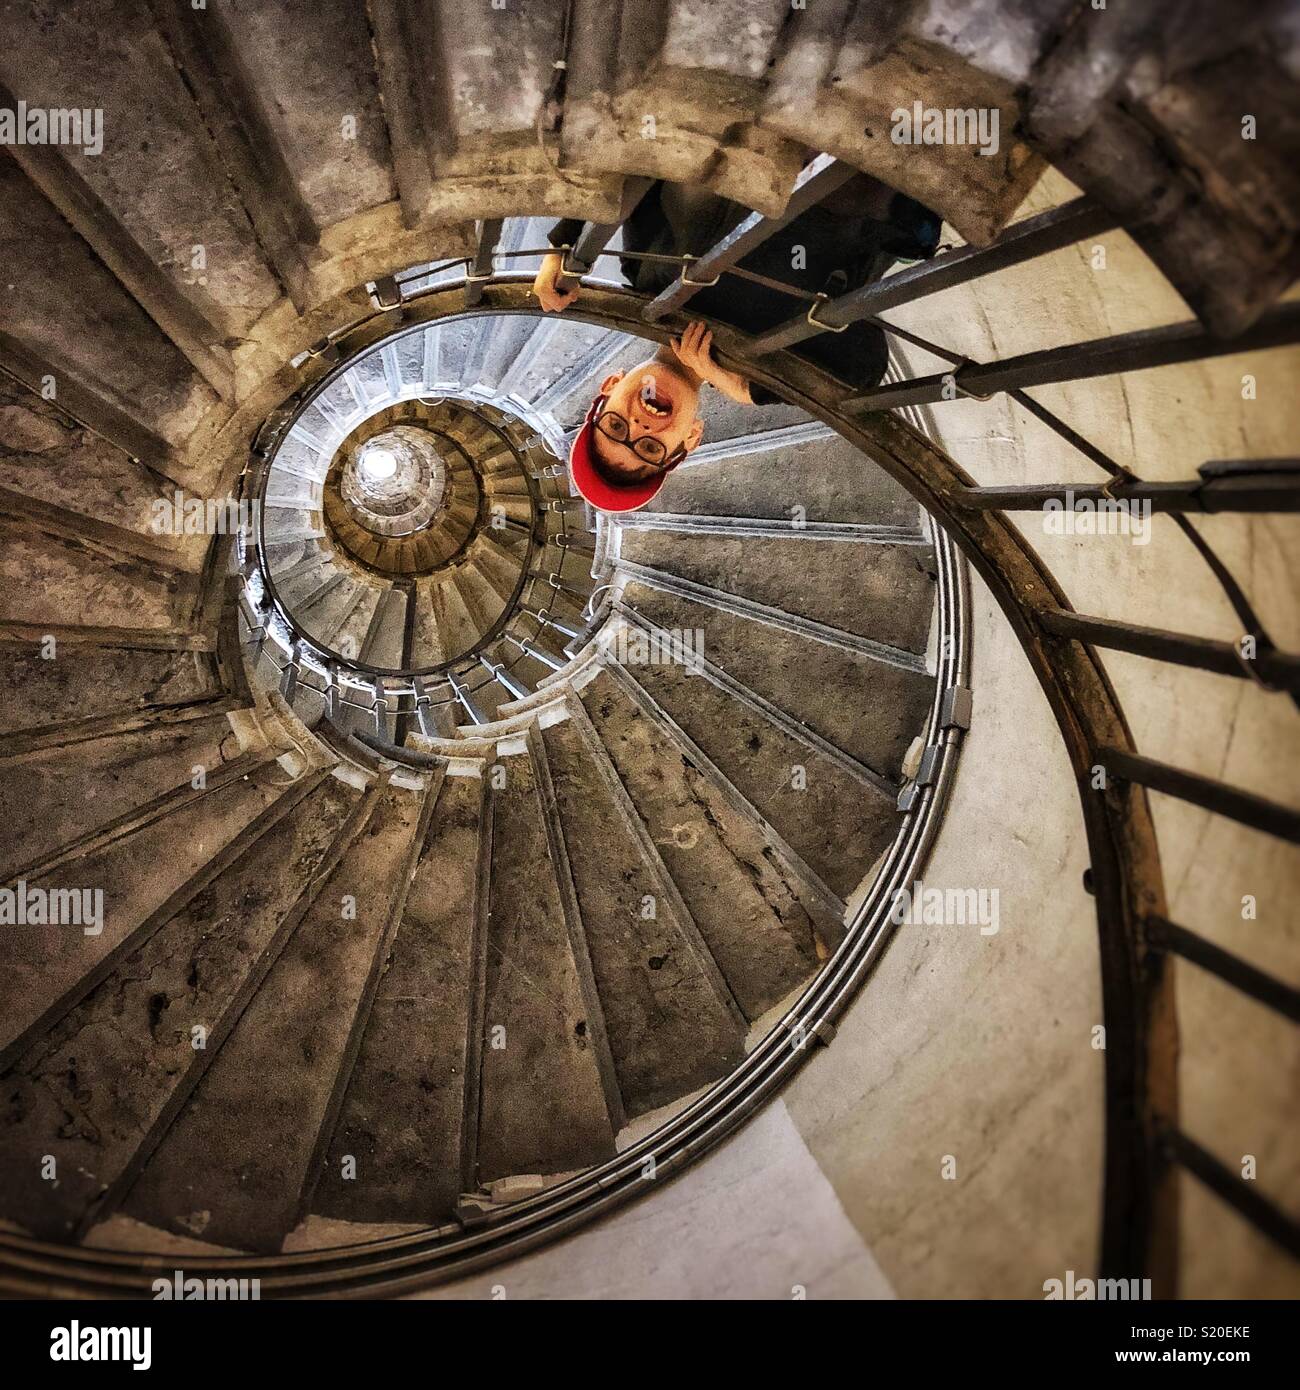 Boy leaning over the bannister on a tight spiral stone staircase taken from below Stock Photo